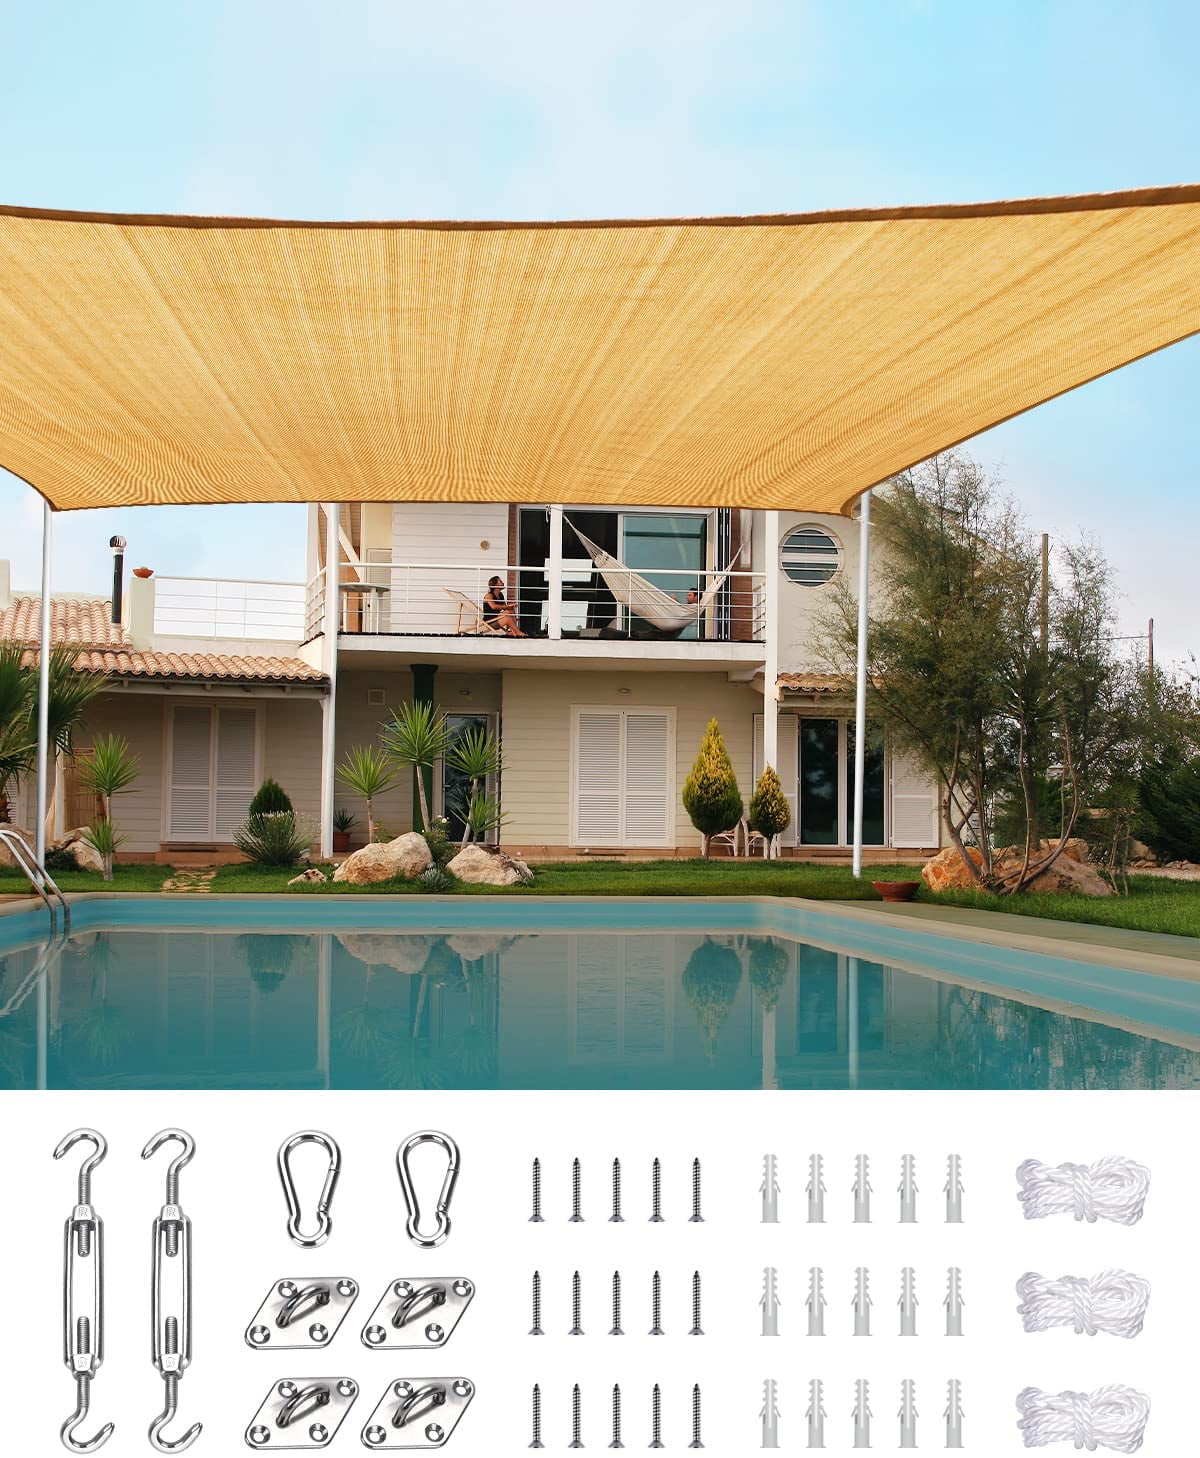 6Ft UV Block Rectangle Sun Shade Sail Canopy Outdoor Patio Pool Top Cover Net 